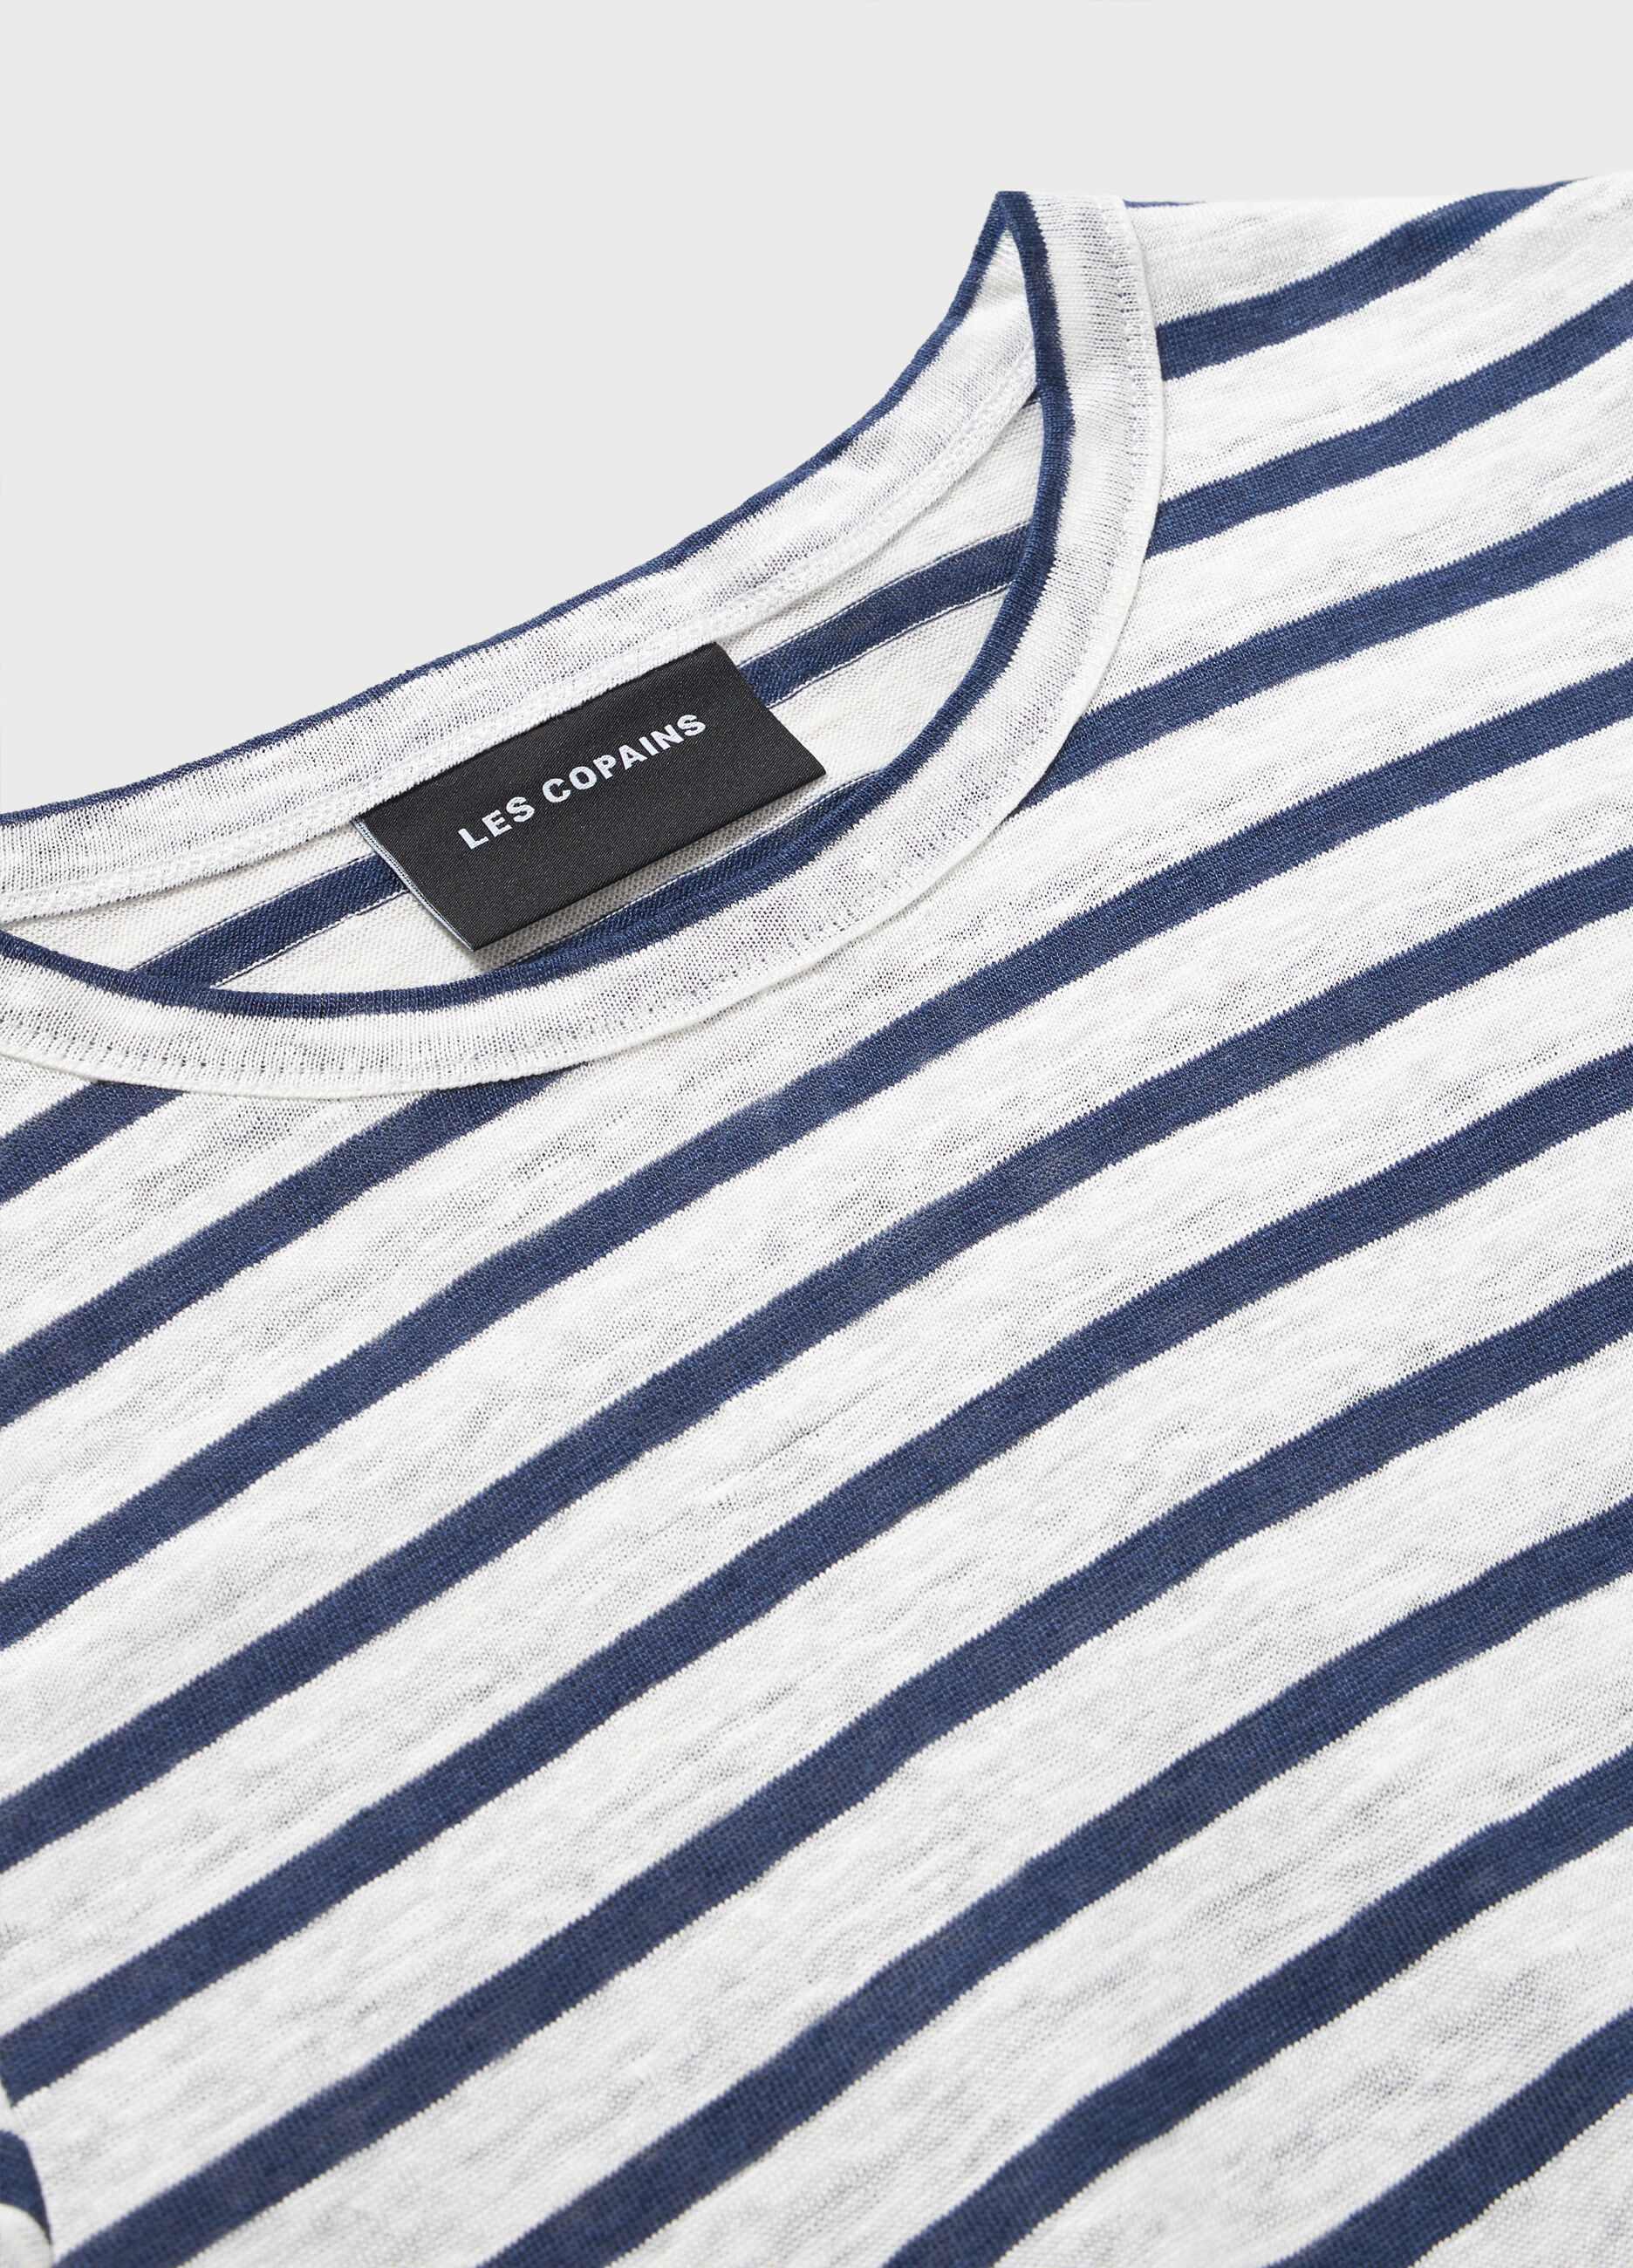 Striped T-shirt in pure linen_4